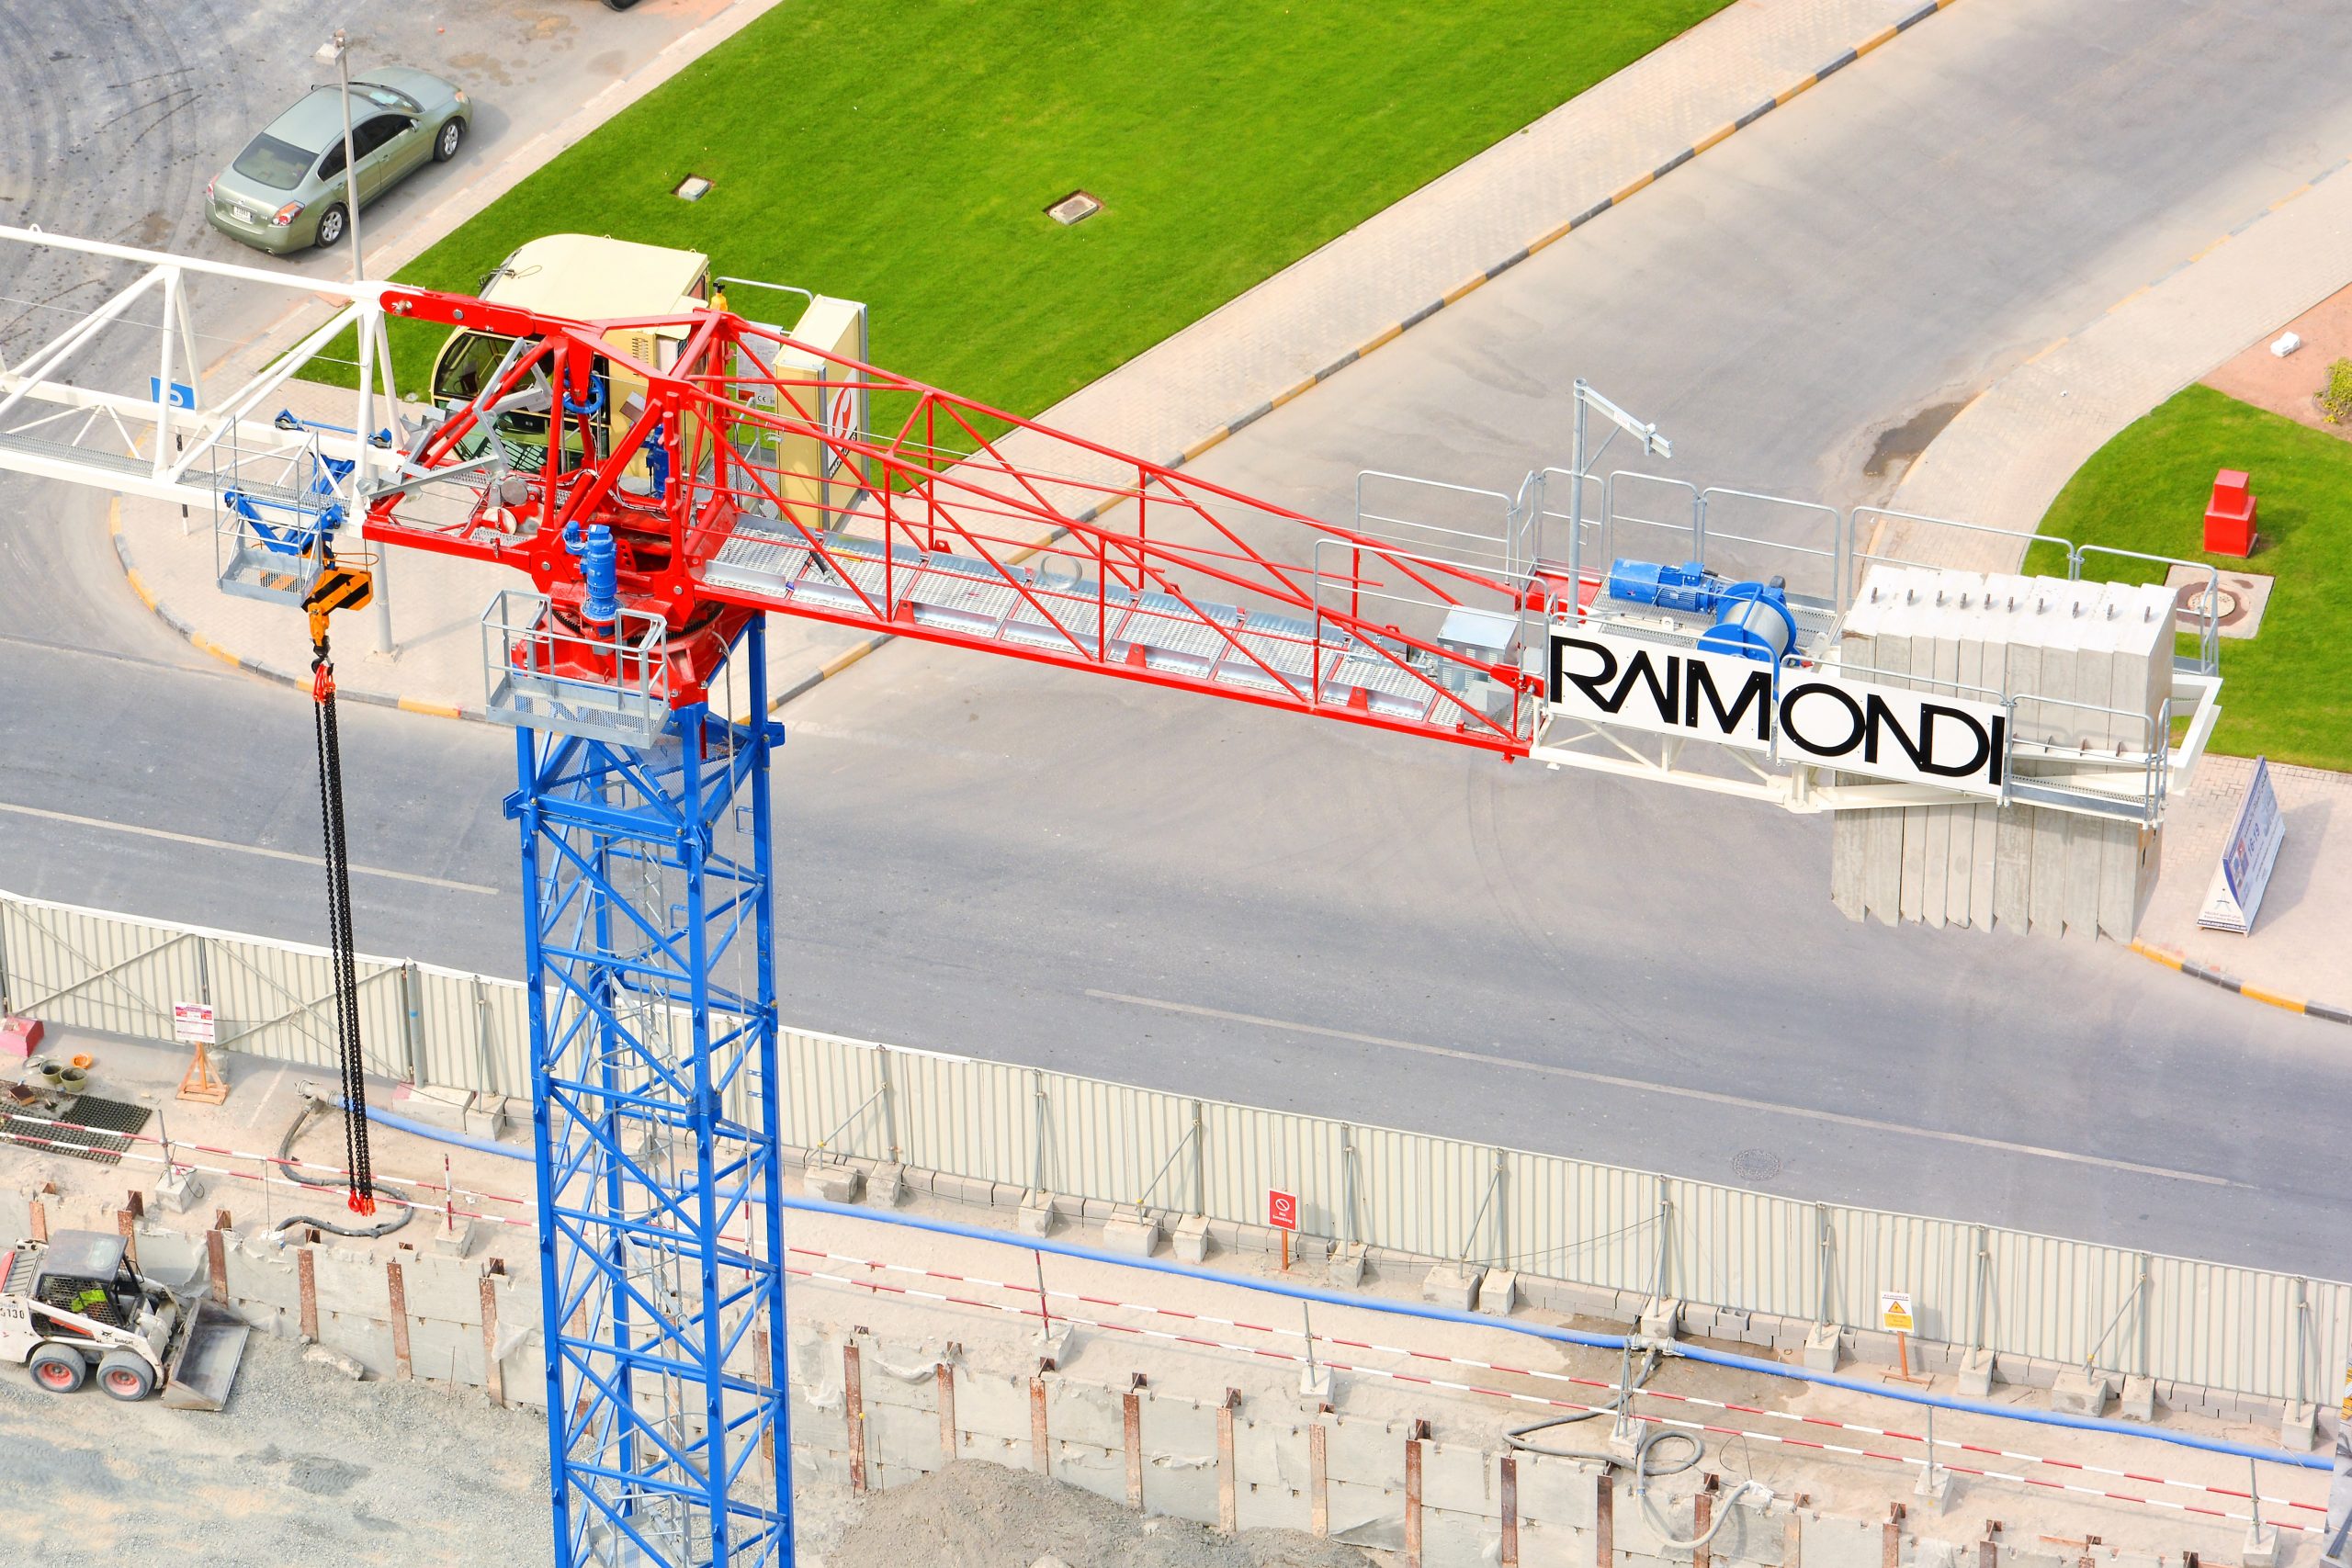 Raimondi Cranes to exhibit in the Middle East for the first time at the Big 5 Heavy in Dubai, UAE